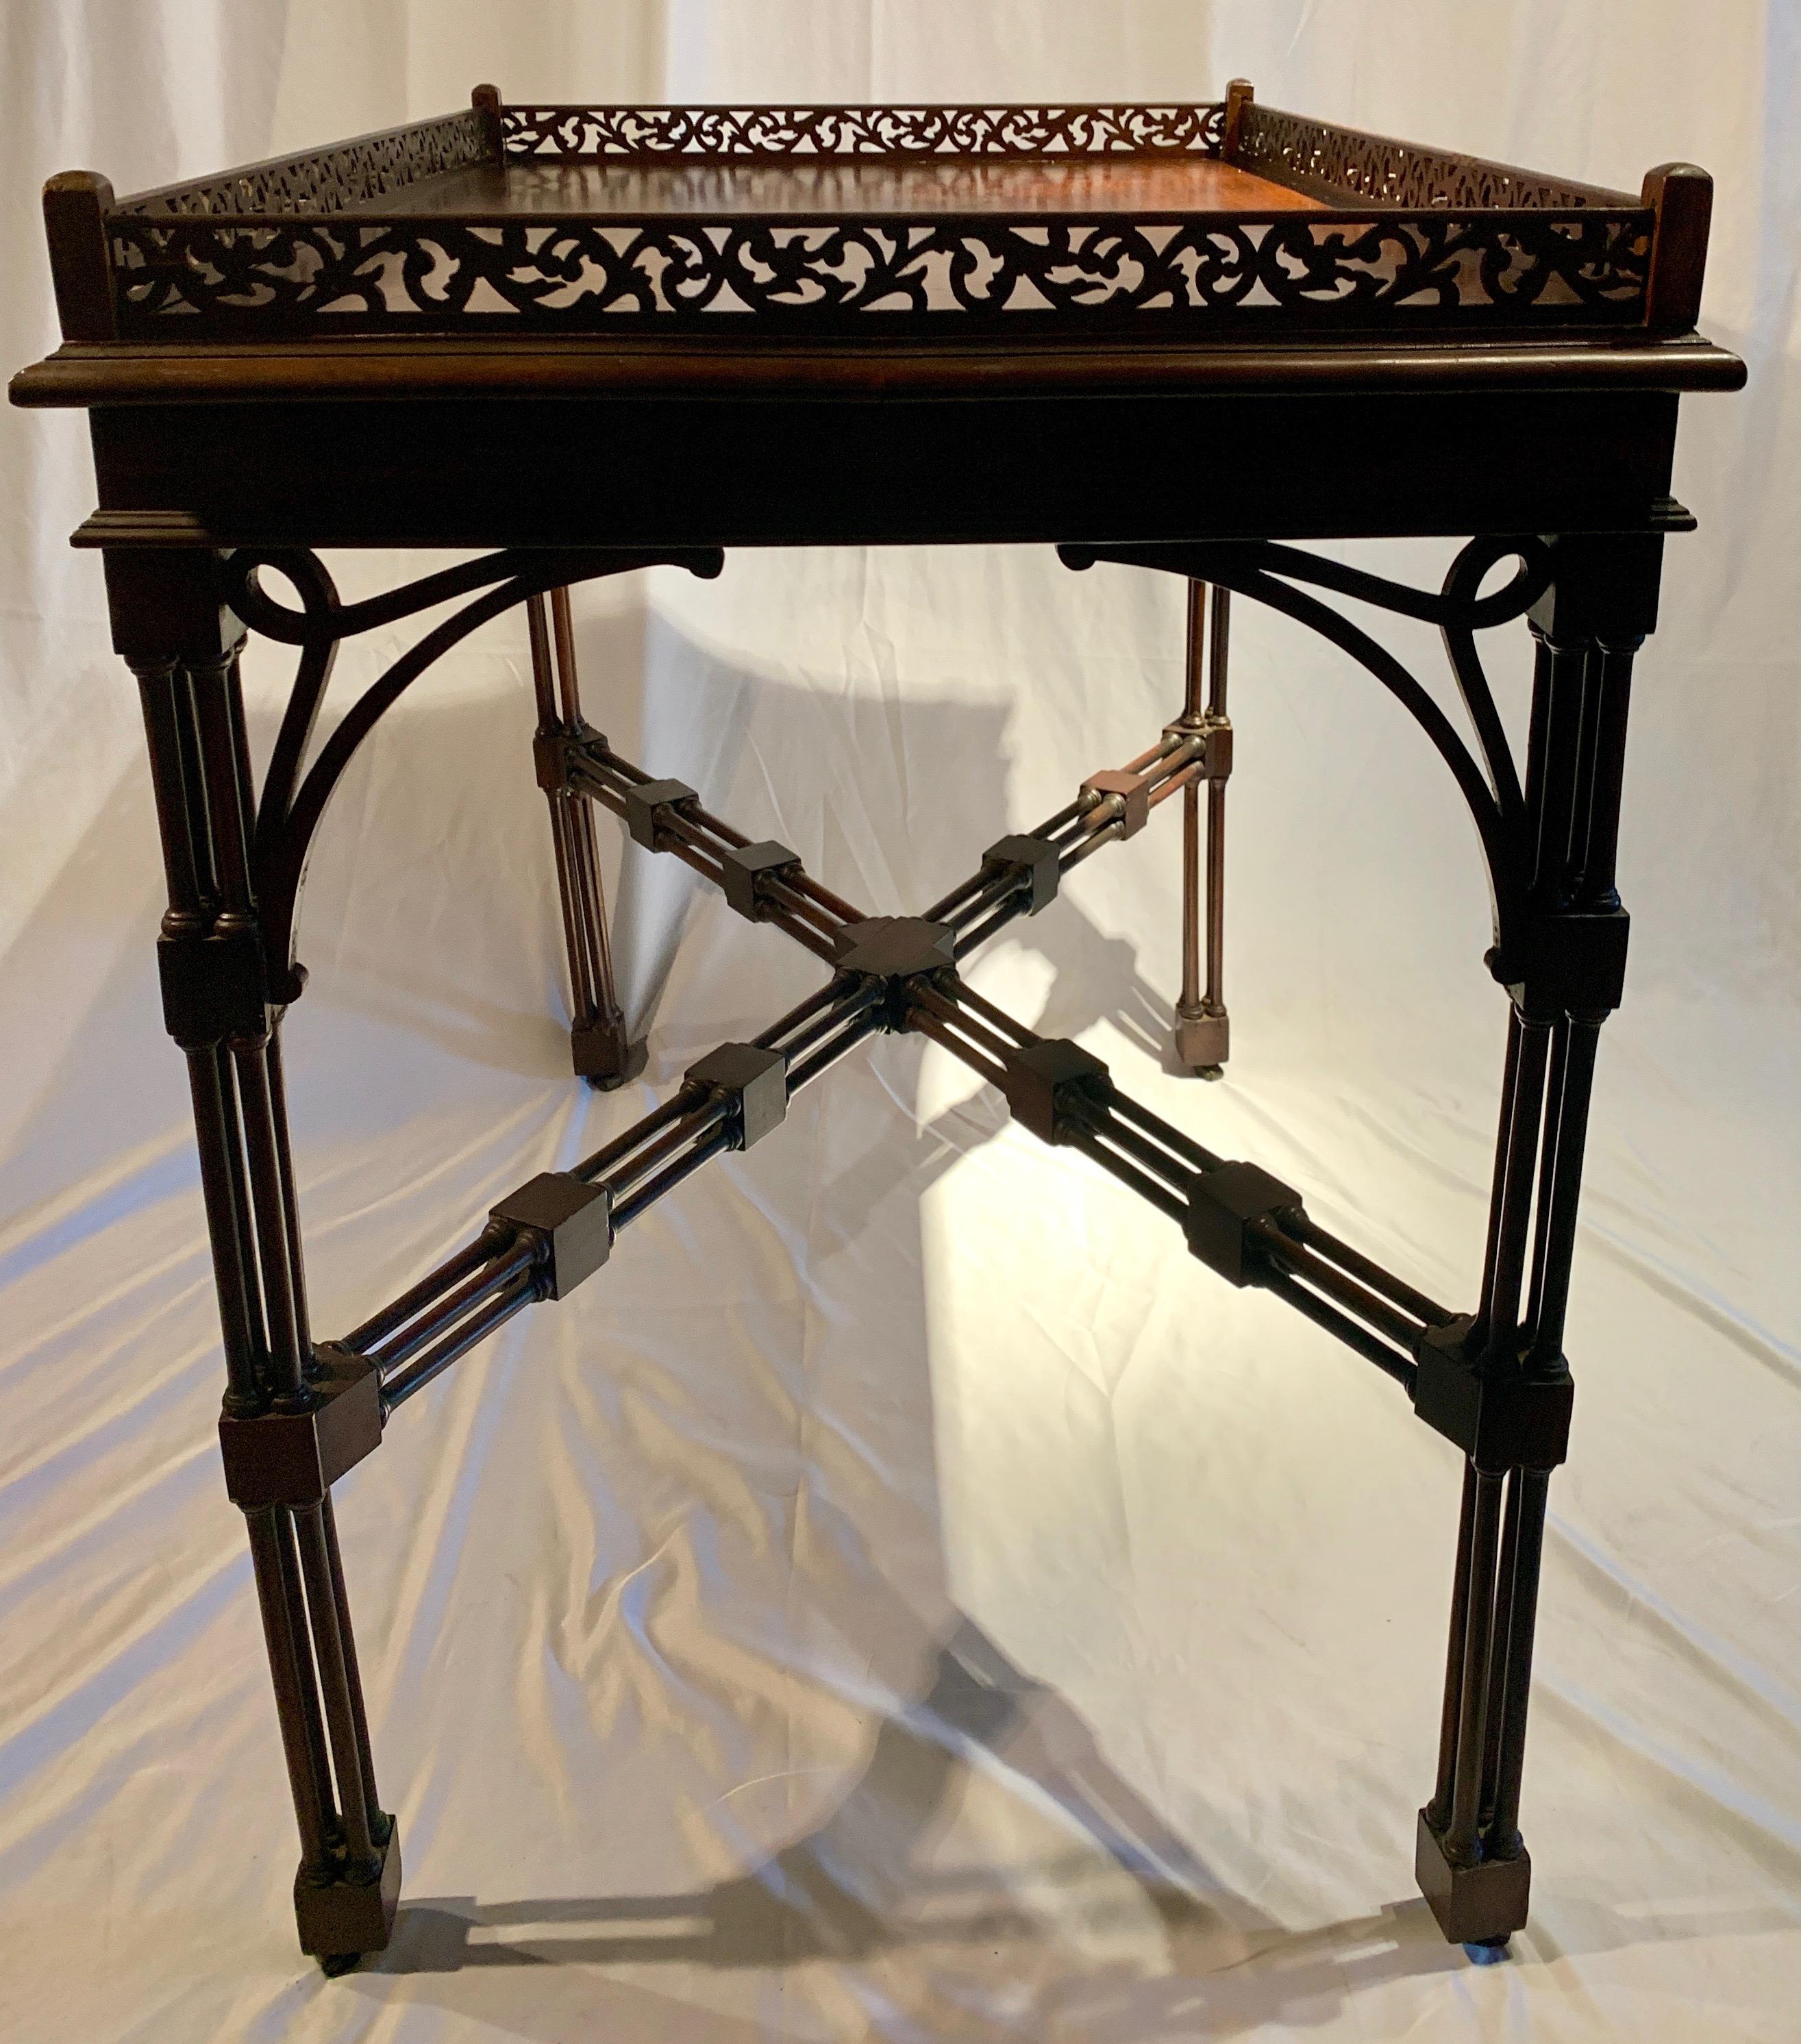 A very classic tea table with nice lines and fretwork. Of medium size so a good fit for many rooms.
 